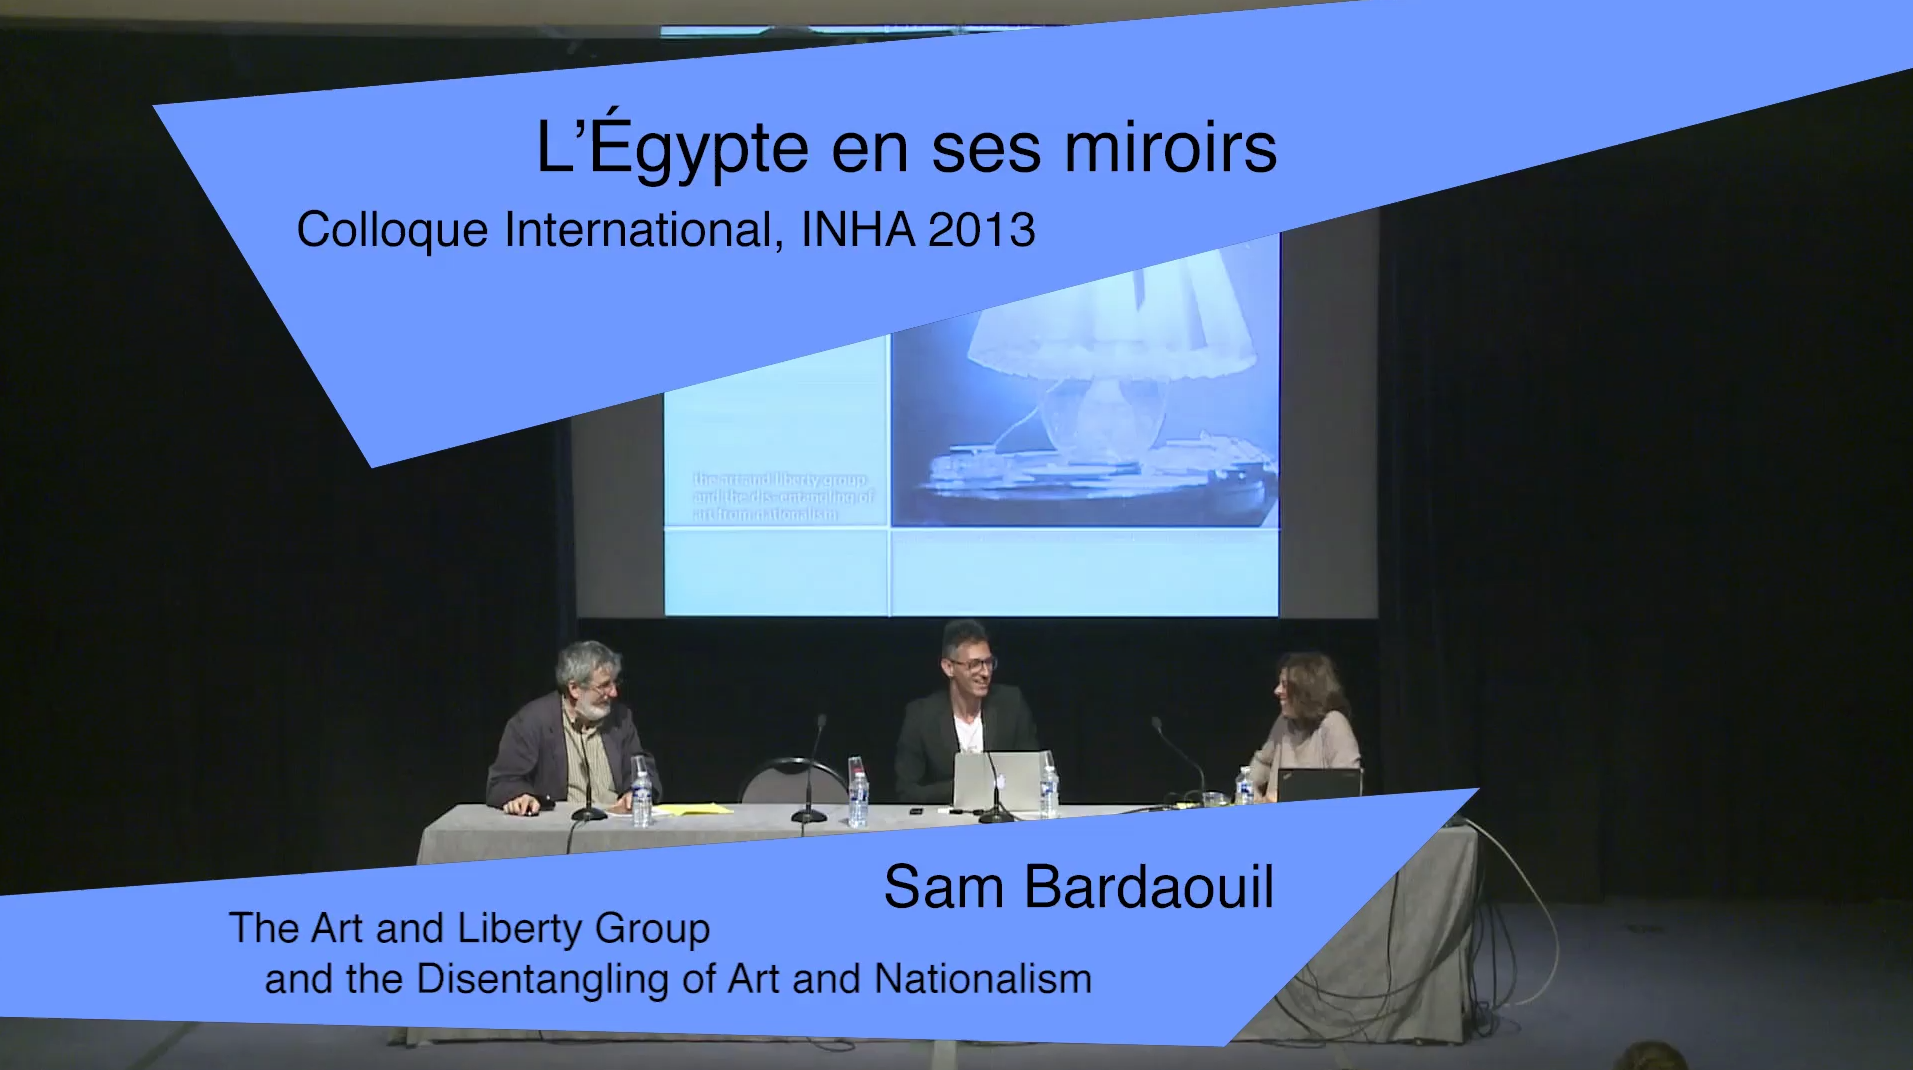 Sam Bardaouil, Plateforme Art reOriented, « The Art and Liberty Group and the disentangling of Art from Nationalism »